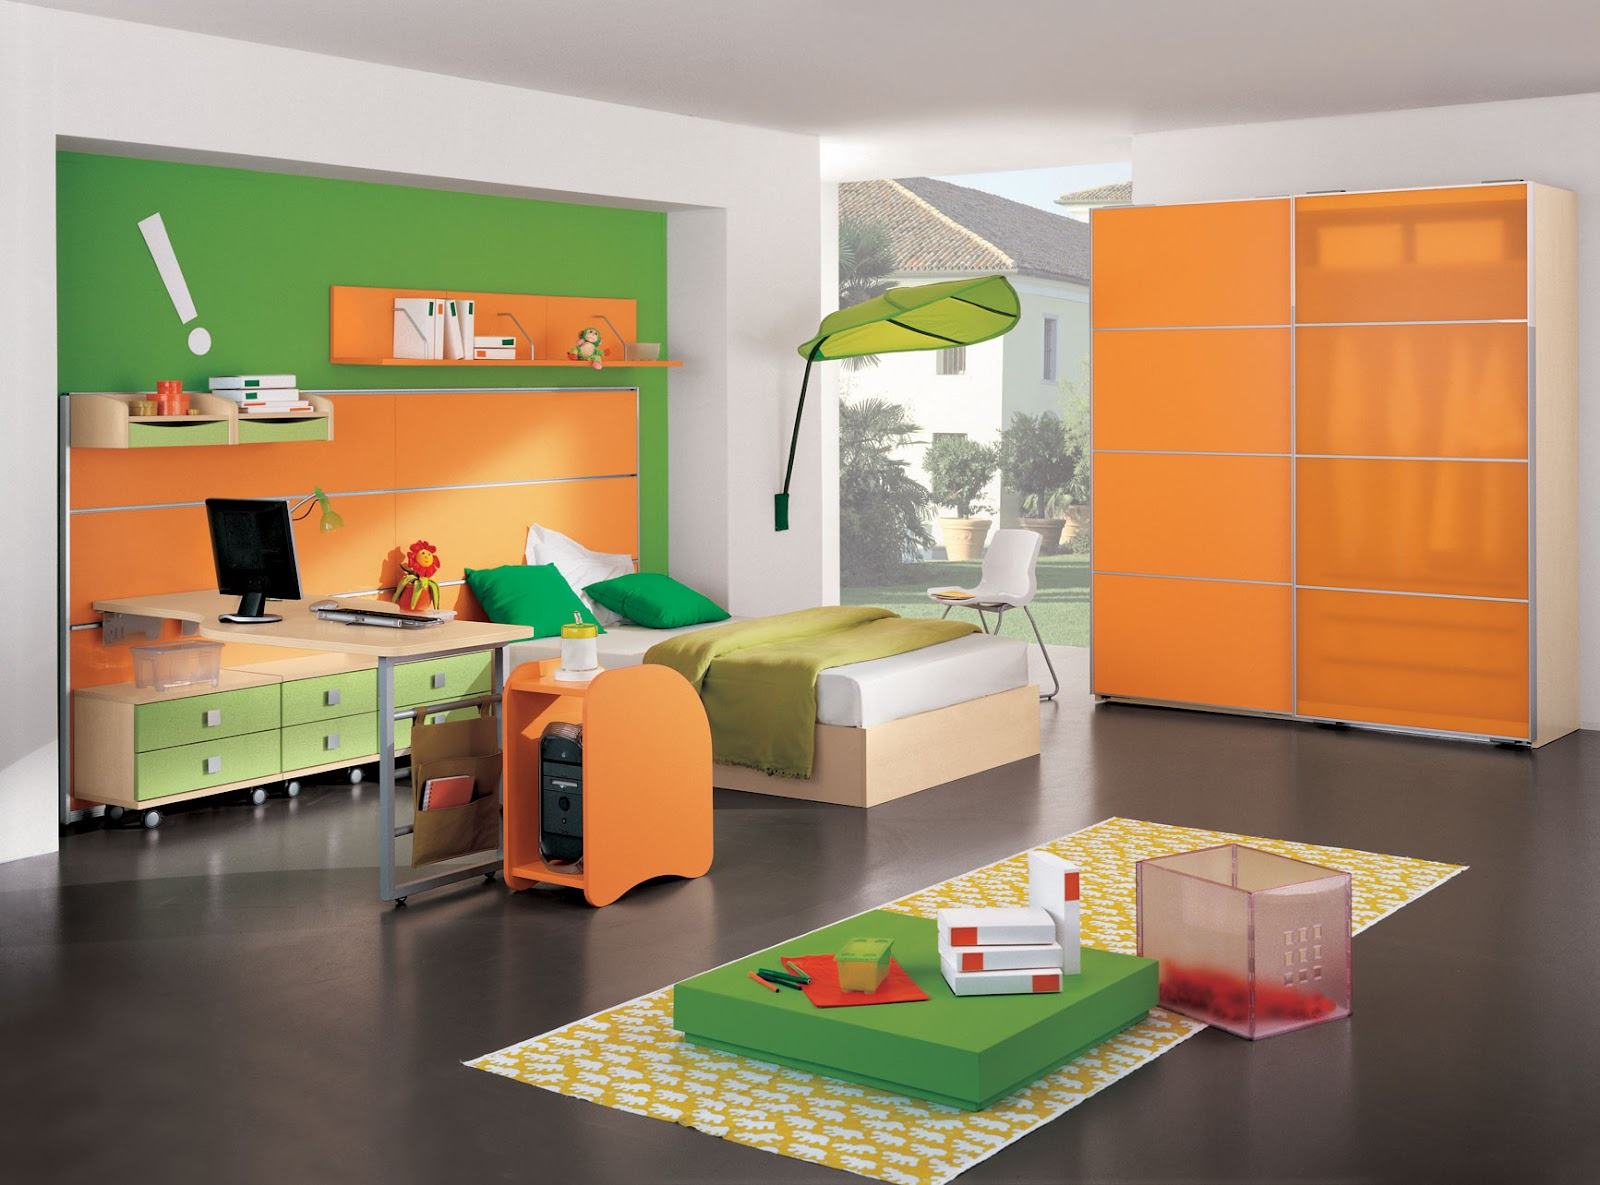 Boys Room Applying Admirable Boys Room Paint Ideas Applying Green And Orange Color With Single Bed And Cabinet Furnished With Desk And Completed With White Chair Kids Room Boys Room Paint Ideas With Simple Design